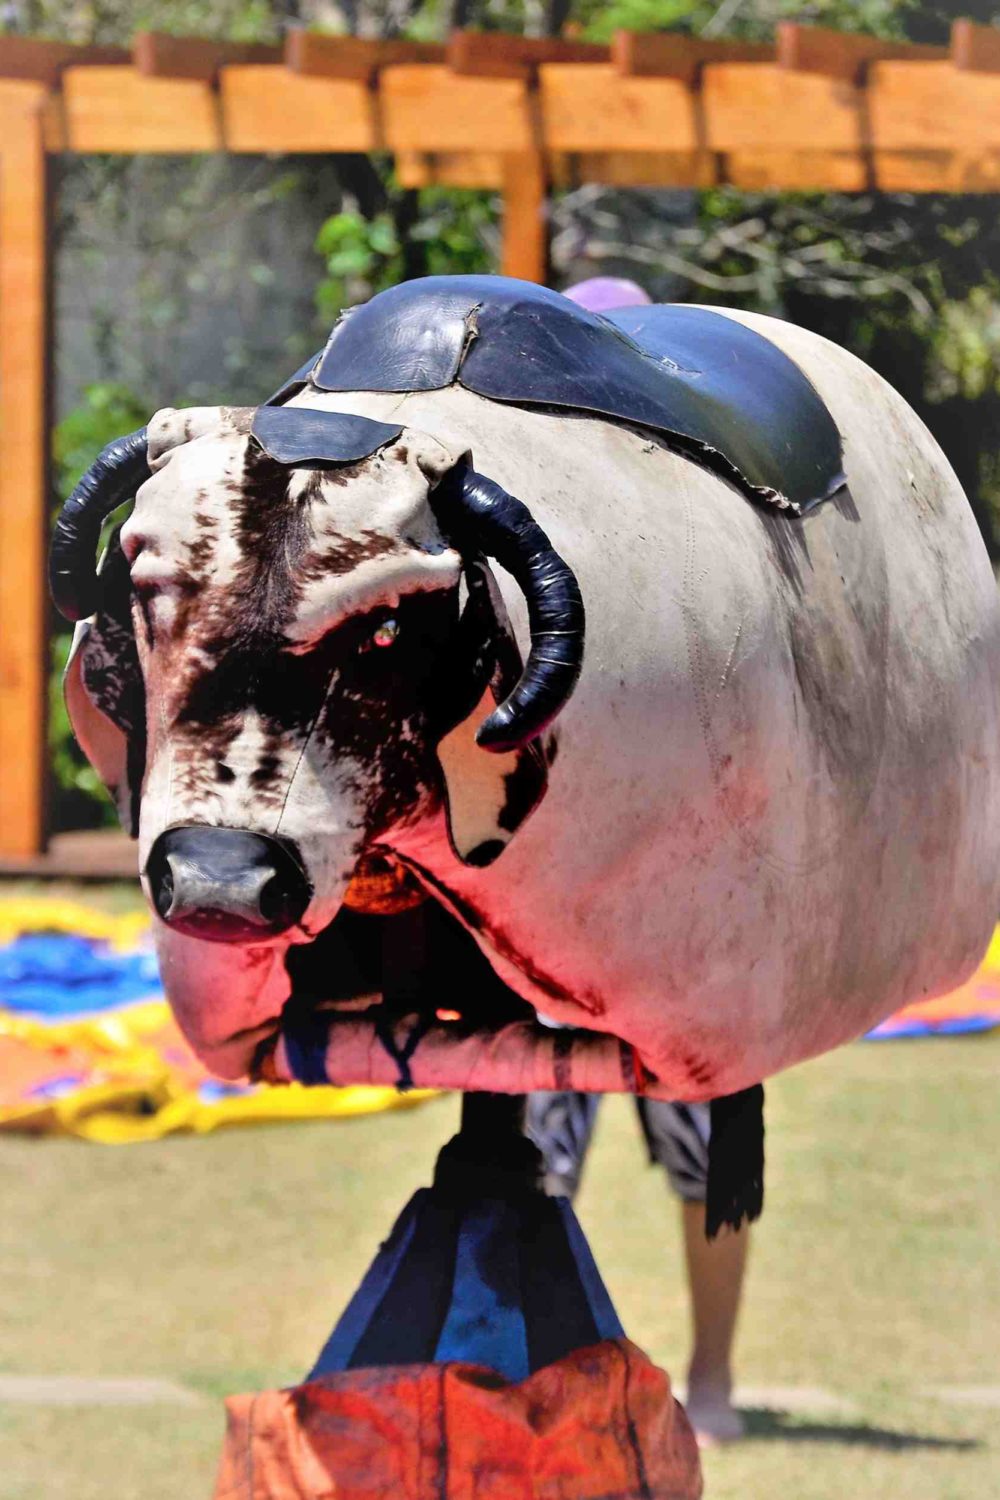 Read This Before You Buy a Mechanical Bull for Your Small Business